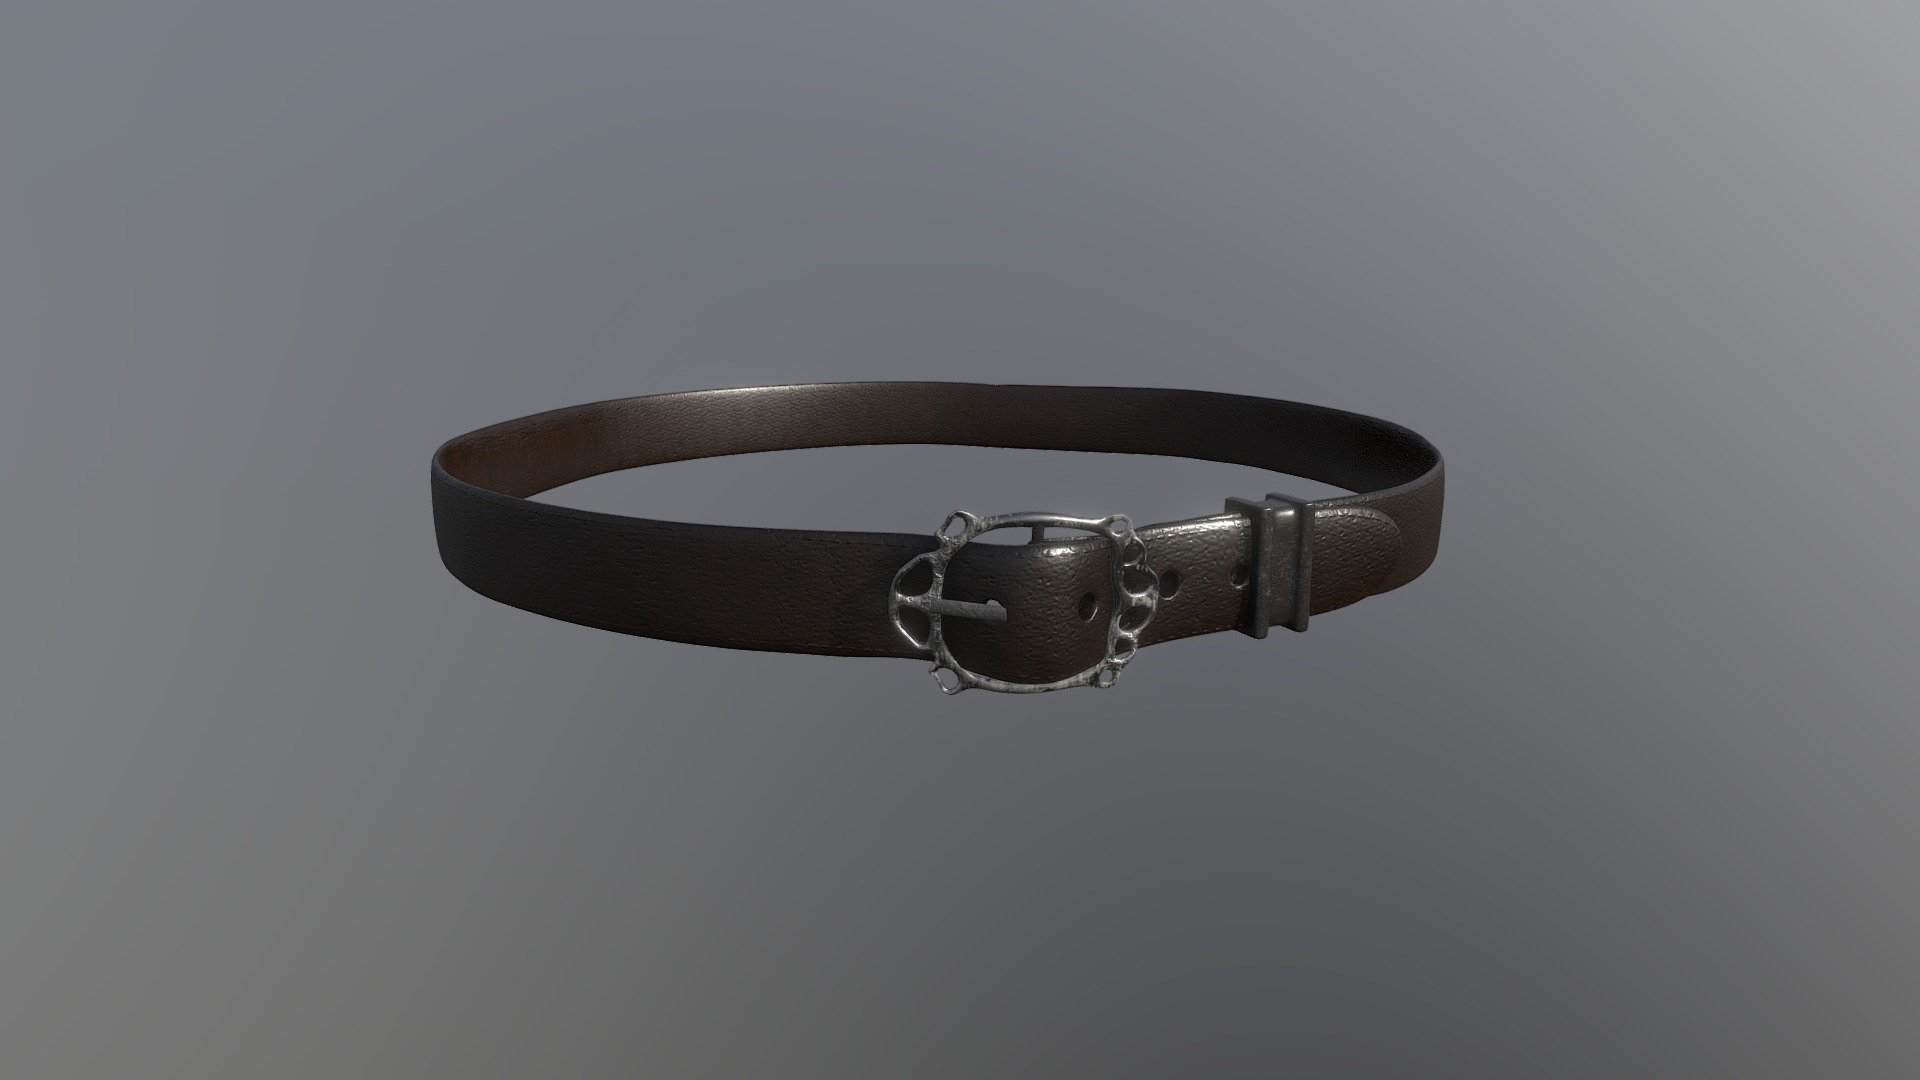 Pirate belt created in Zbrush, textured in substance painter - Pirate belt 3D model - 3D model by heloisemagny 3d model